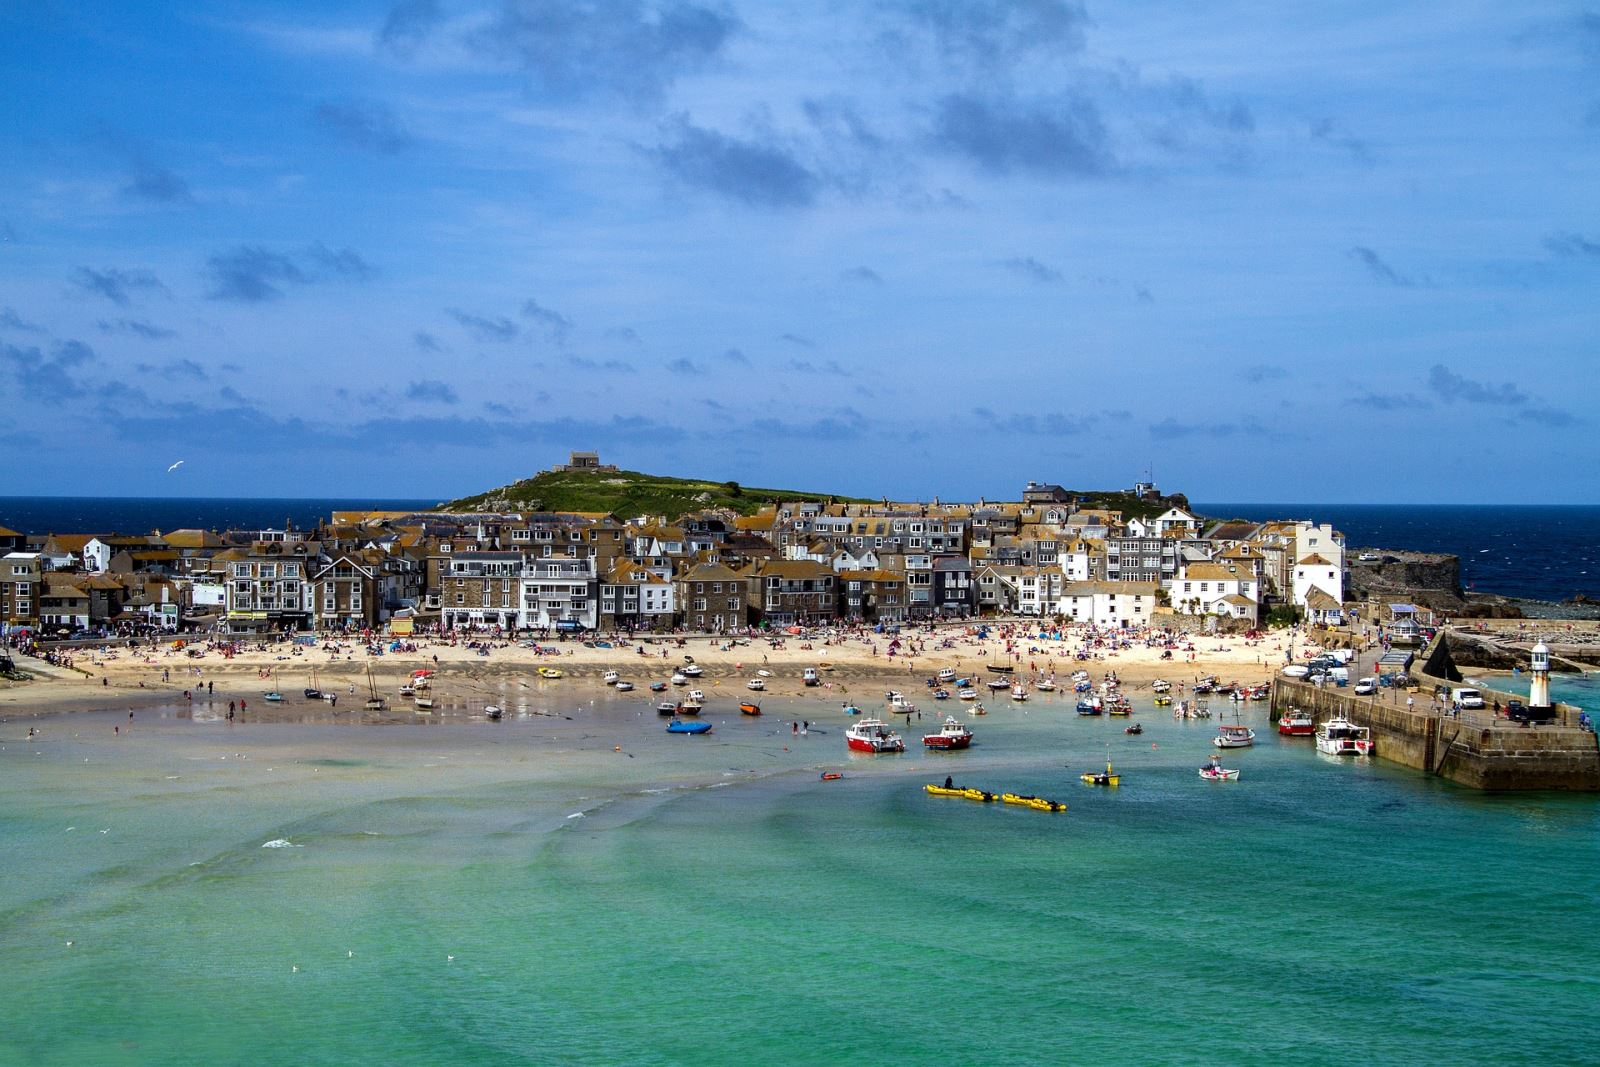 The Best Places to Visit on a Cornwall Holiday, According to UK Mums